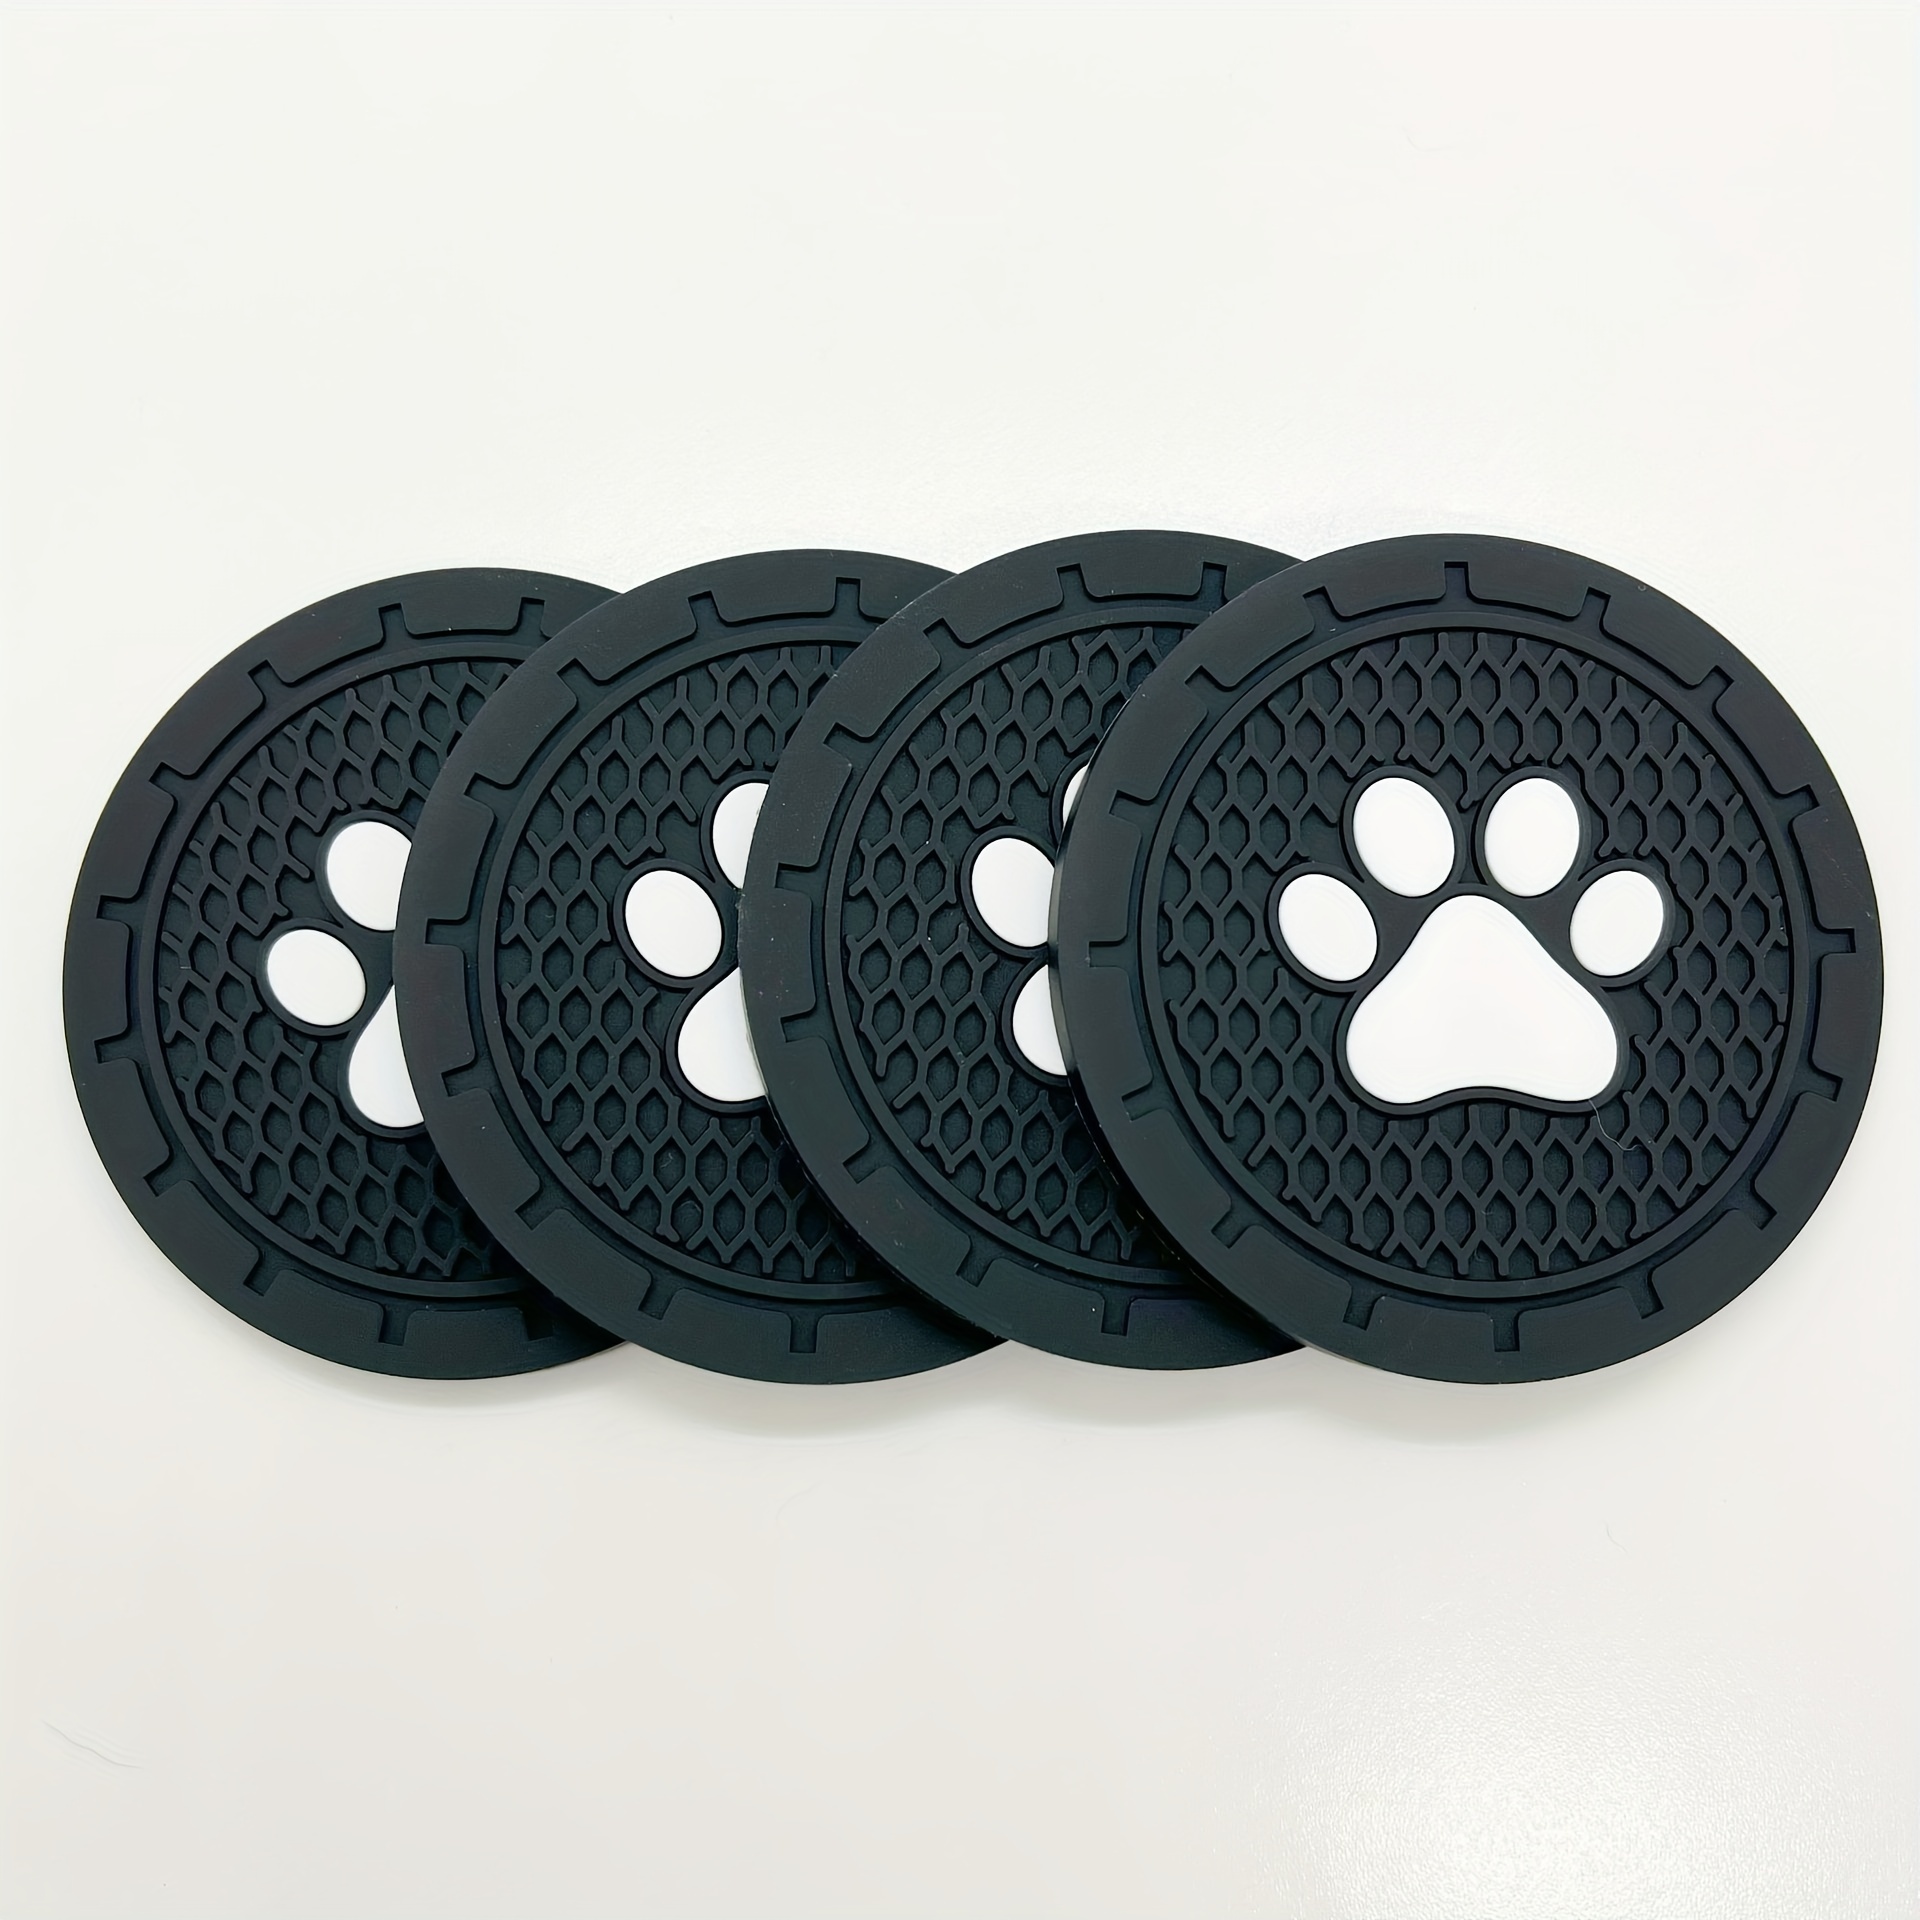 4 Packs Paw Car Coasters Car Cup Holder Coasters Silicone Anti Slip Dog Paw